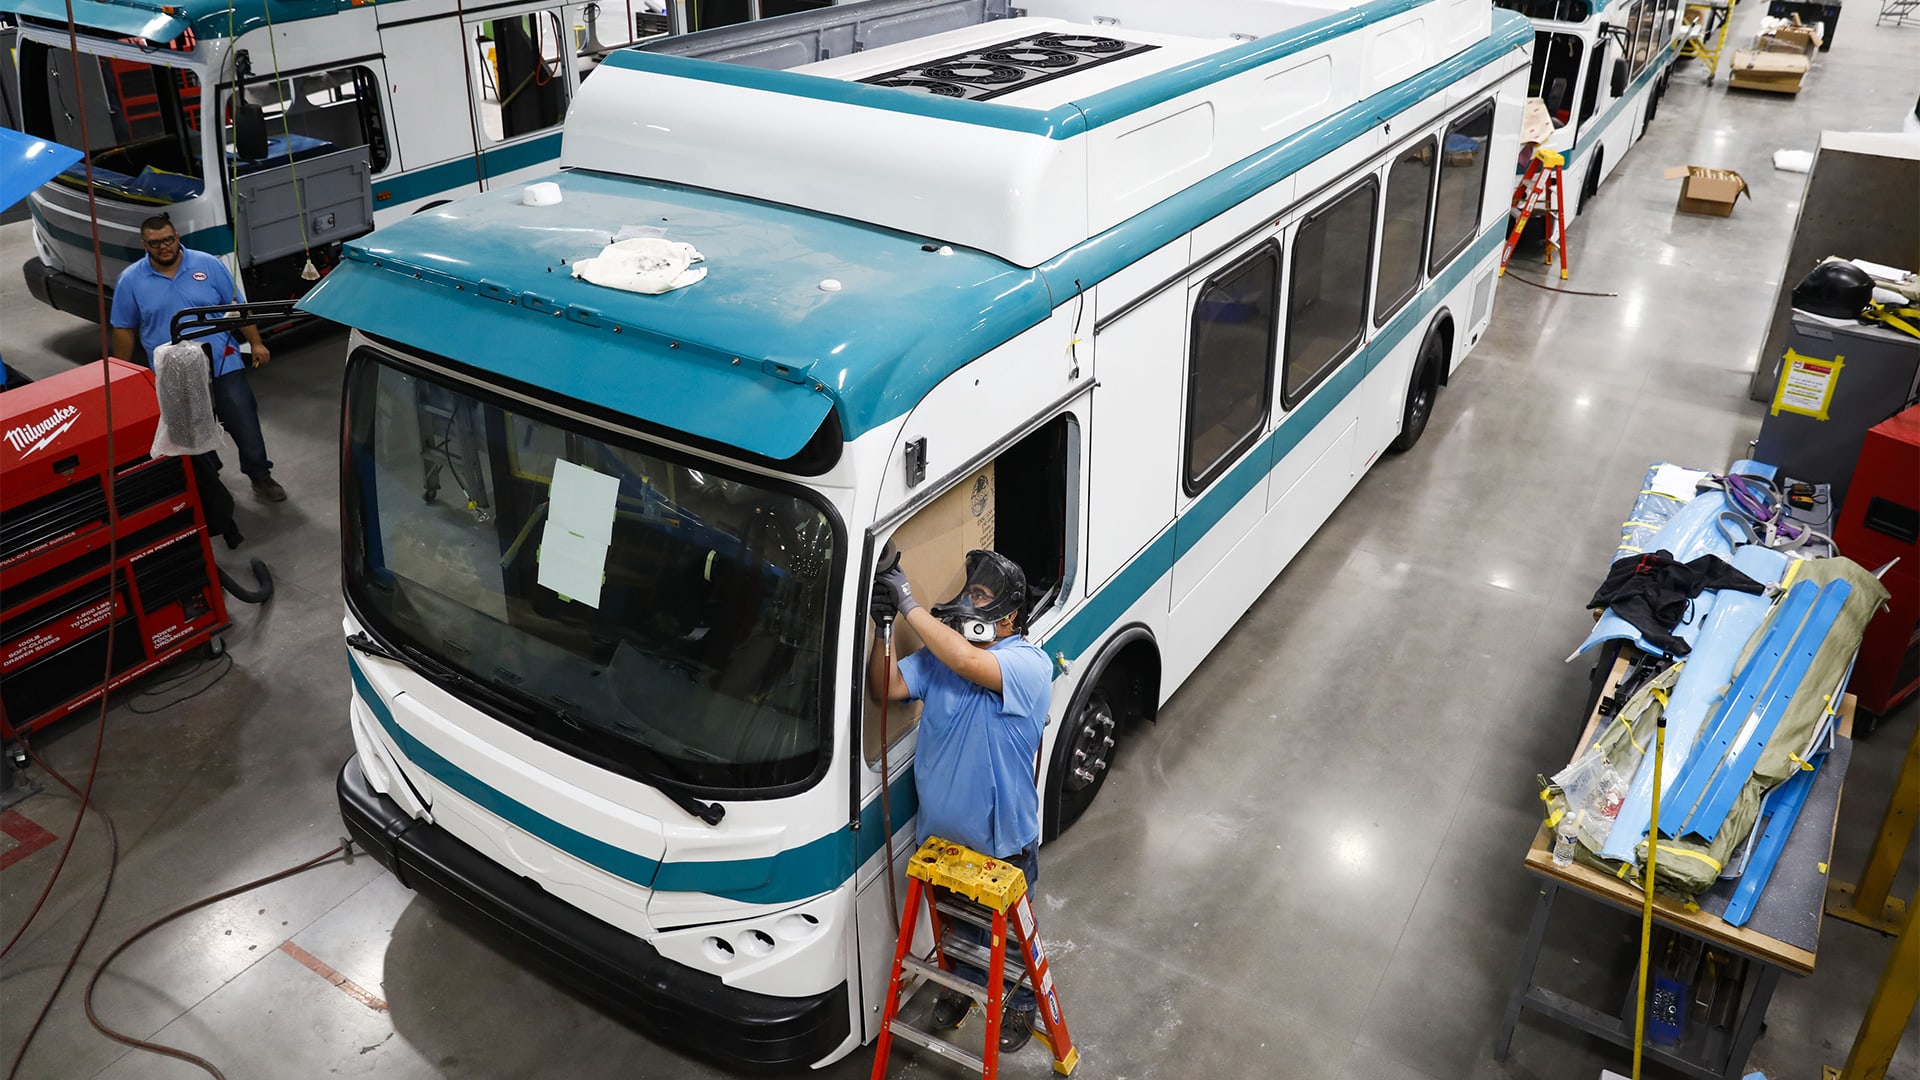 California just decided to move to 100% electric city buses